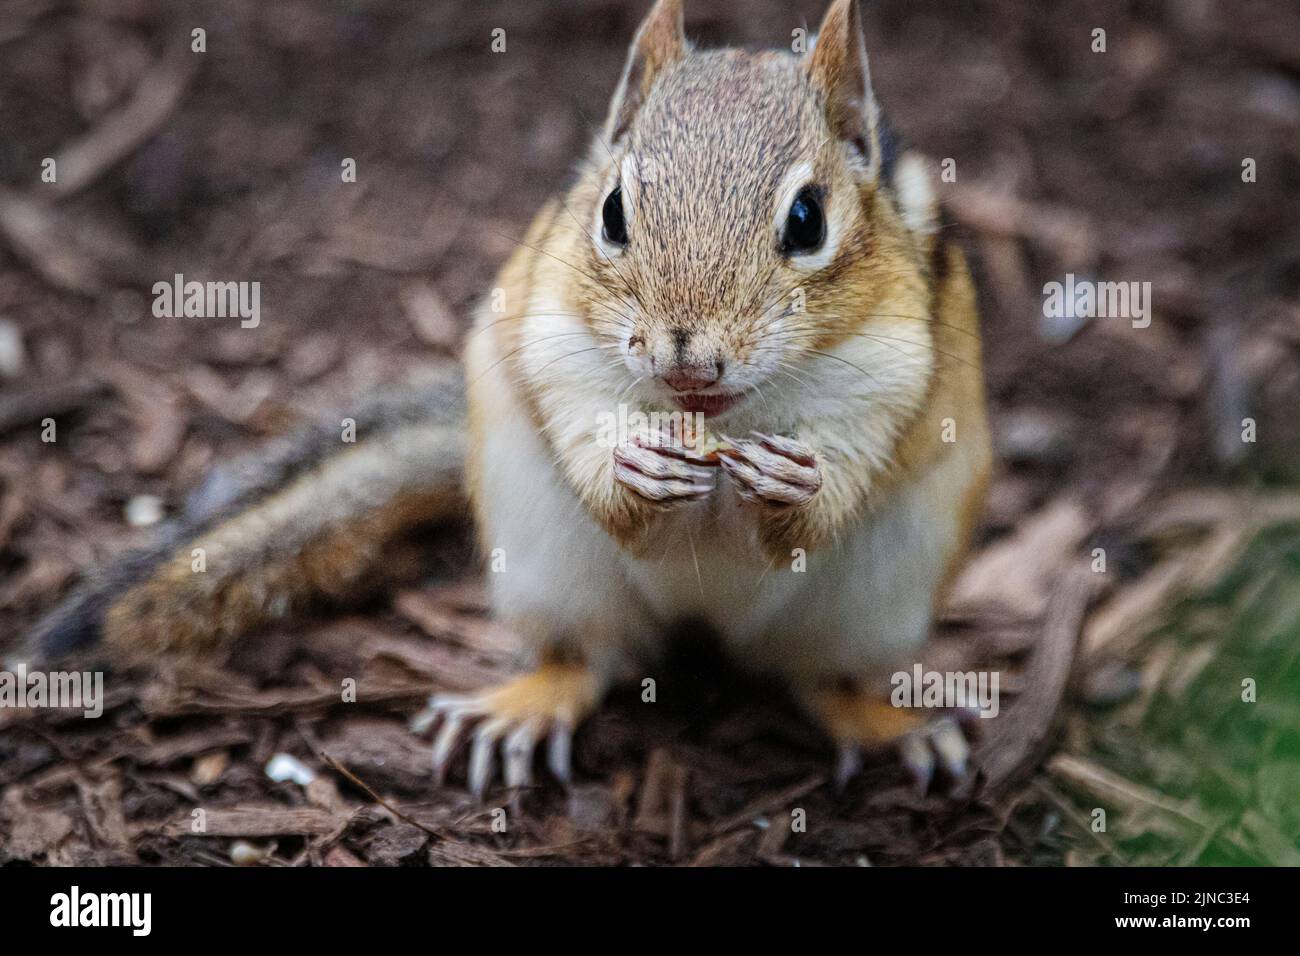 Thye cutest chipmunk eating oranges and looking into camera. Stock Photo